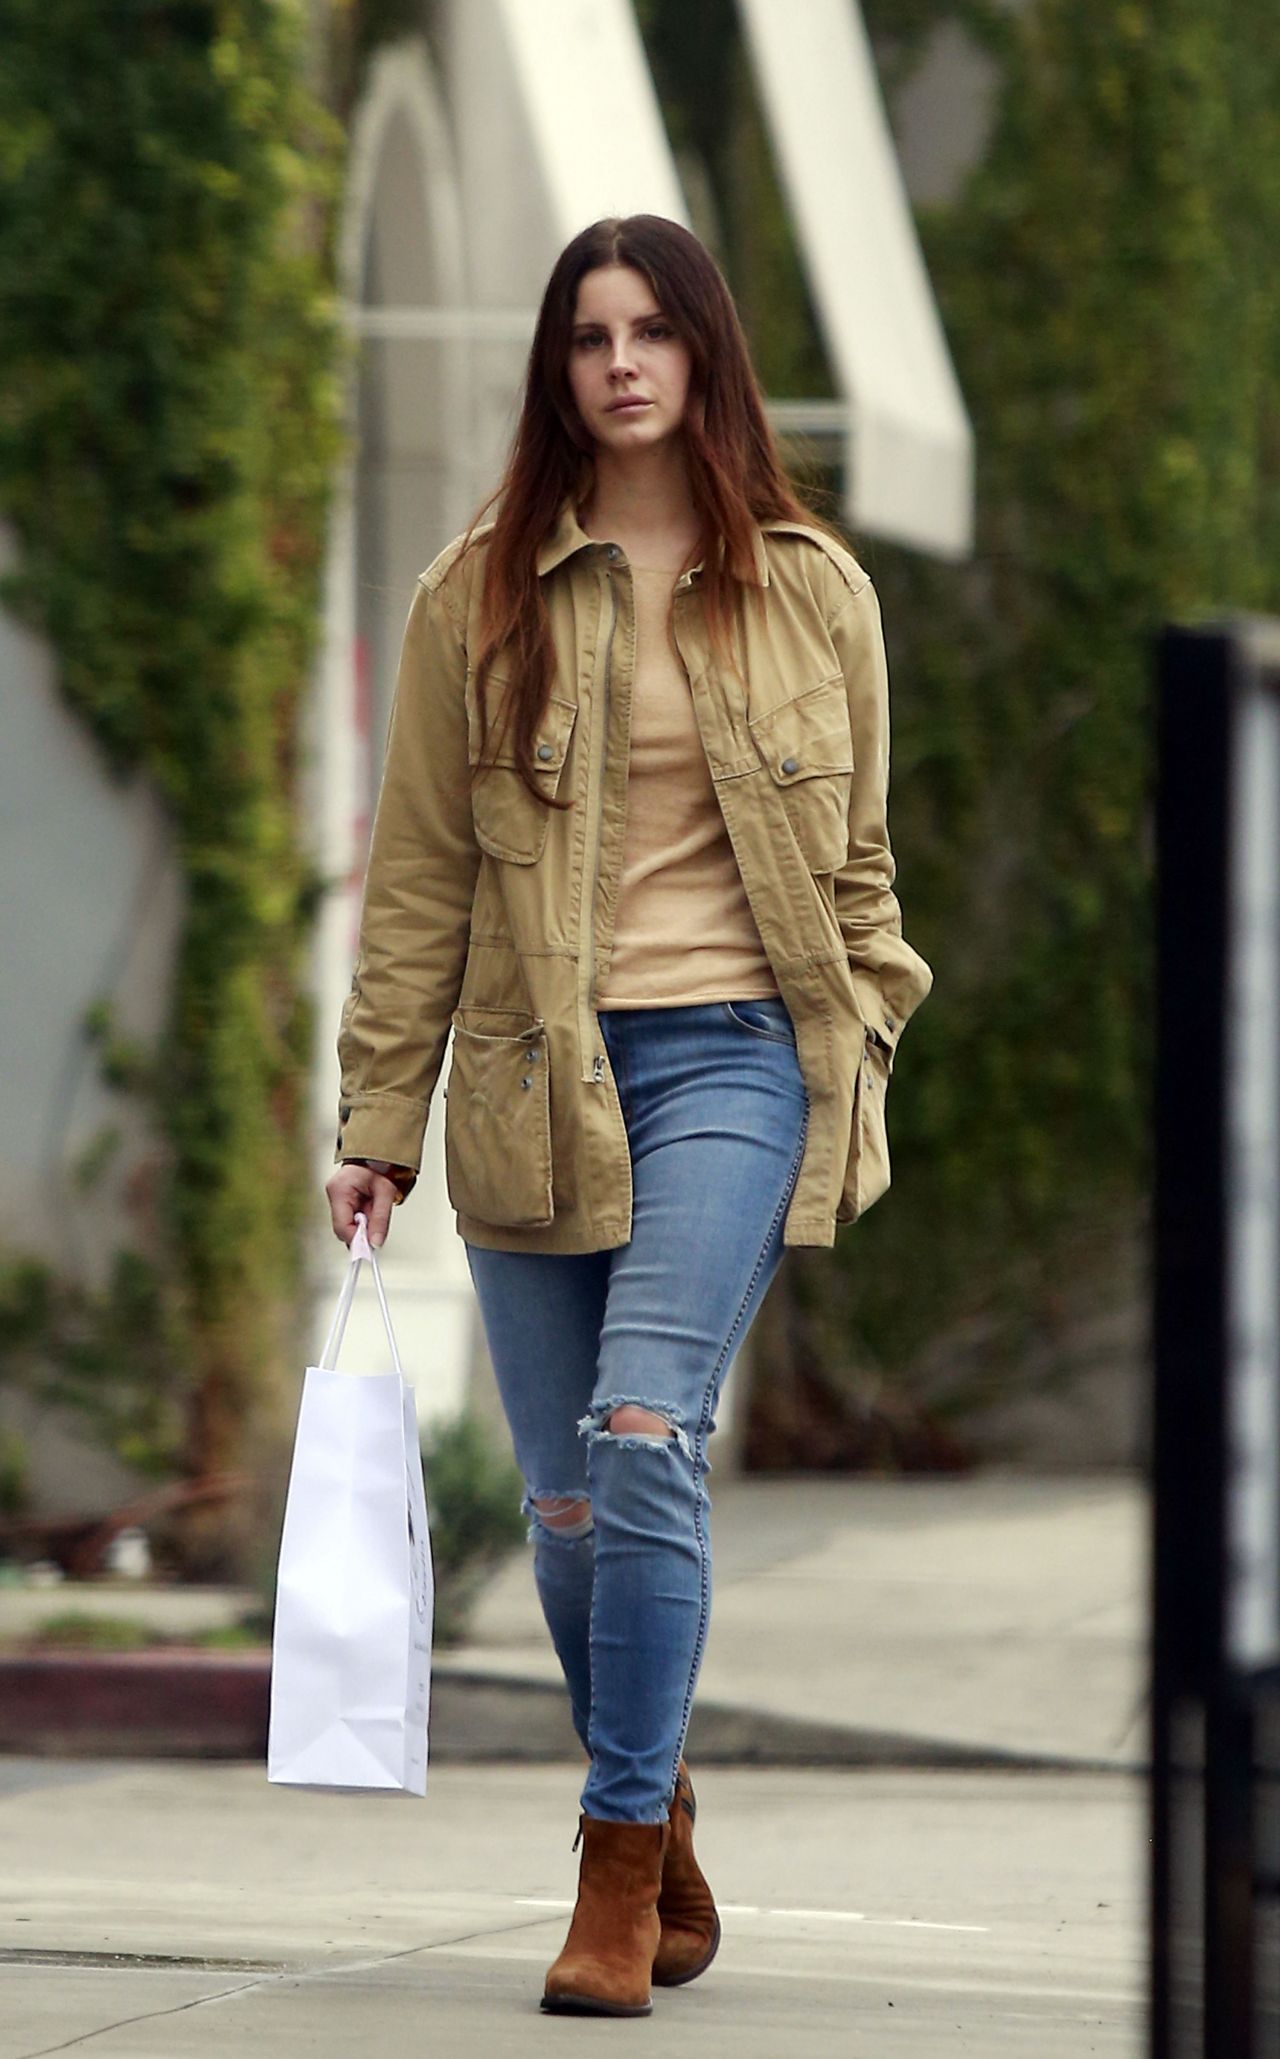 Lana Del Rey - Shopping on Melrose Avenue in Los Angeles 2 